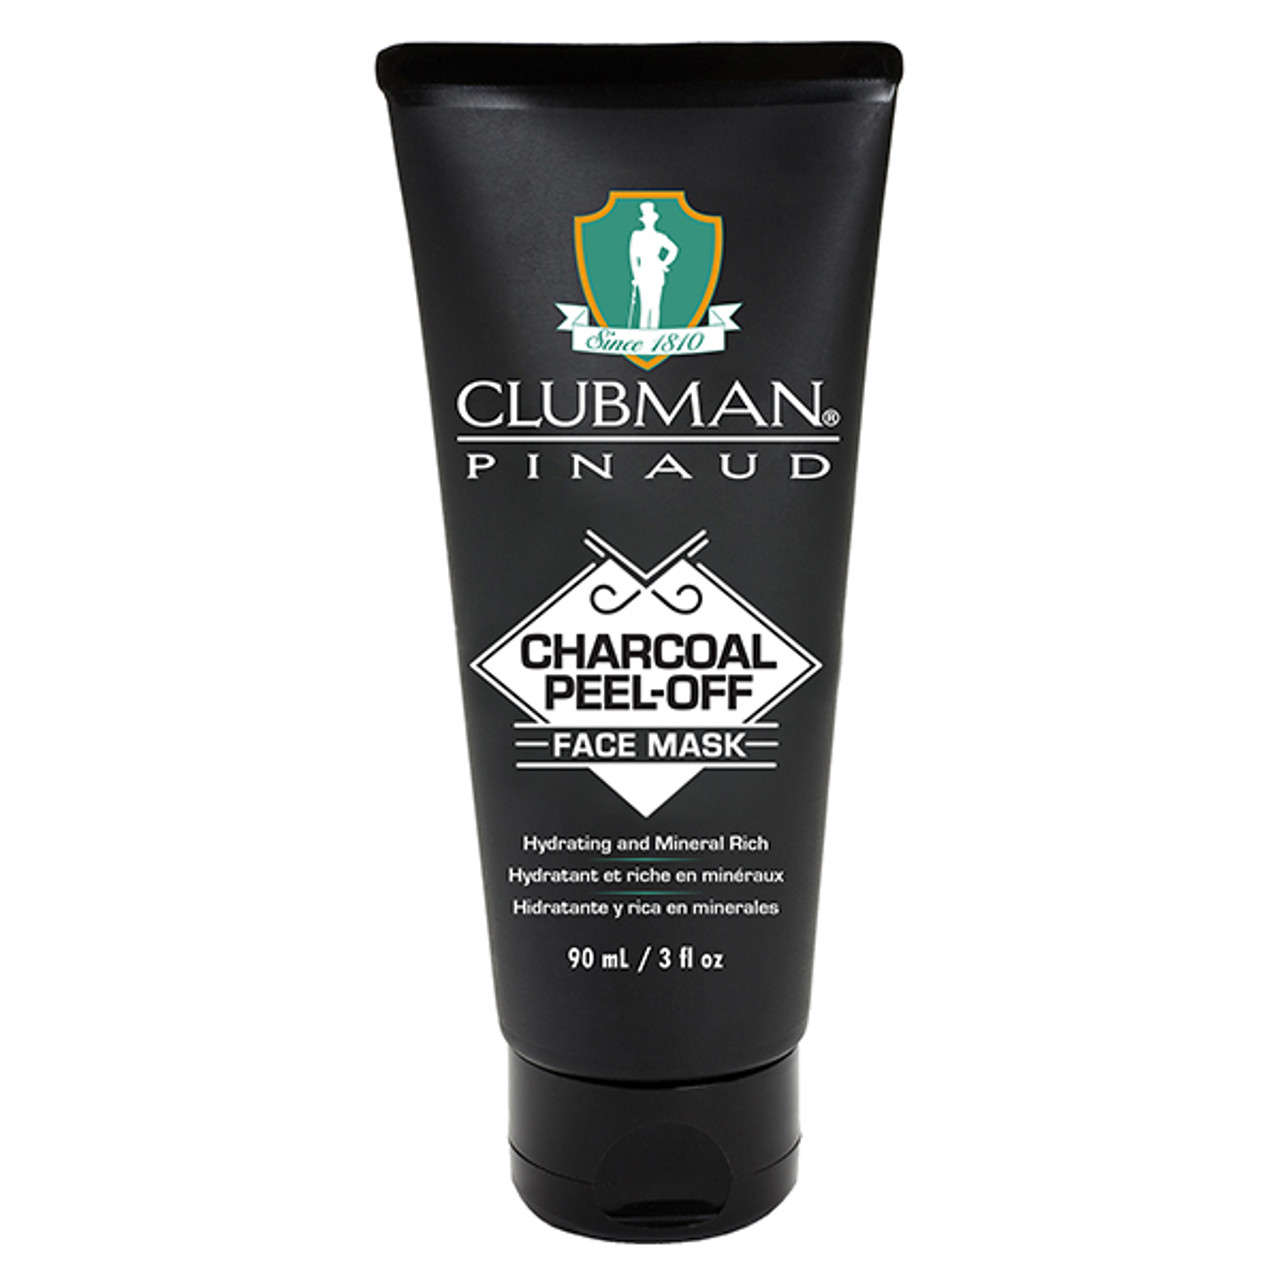 Clubman Charcoal Face Mask